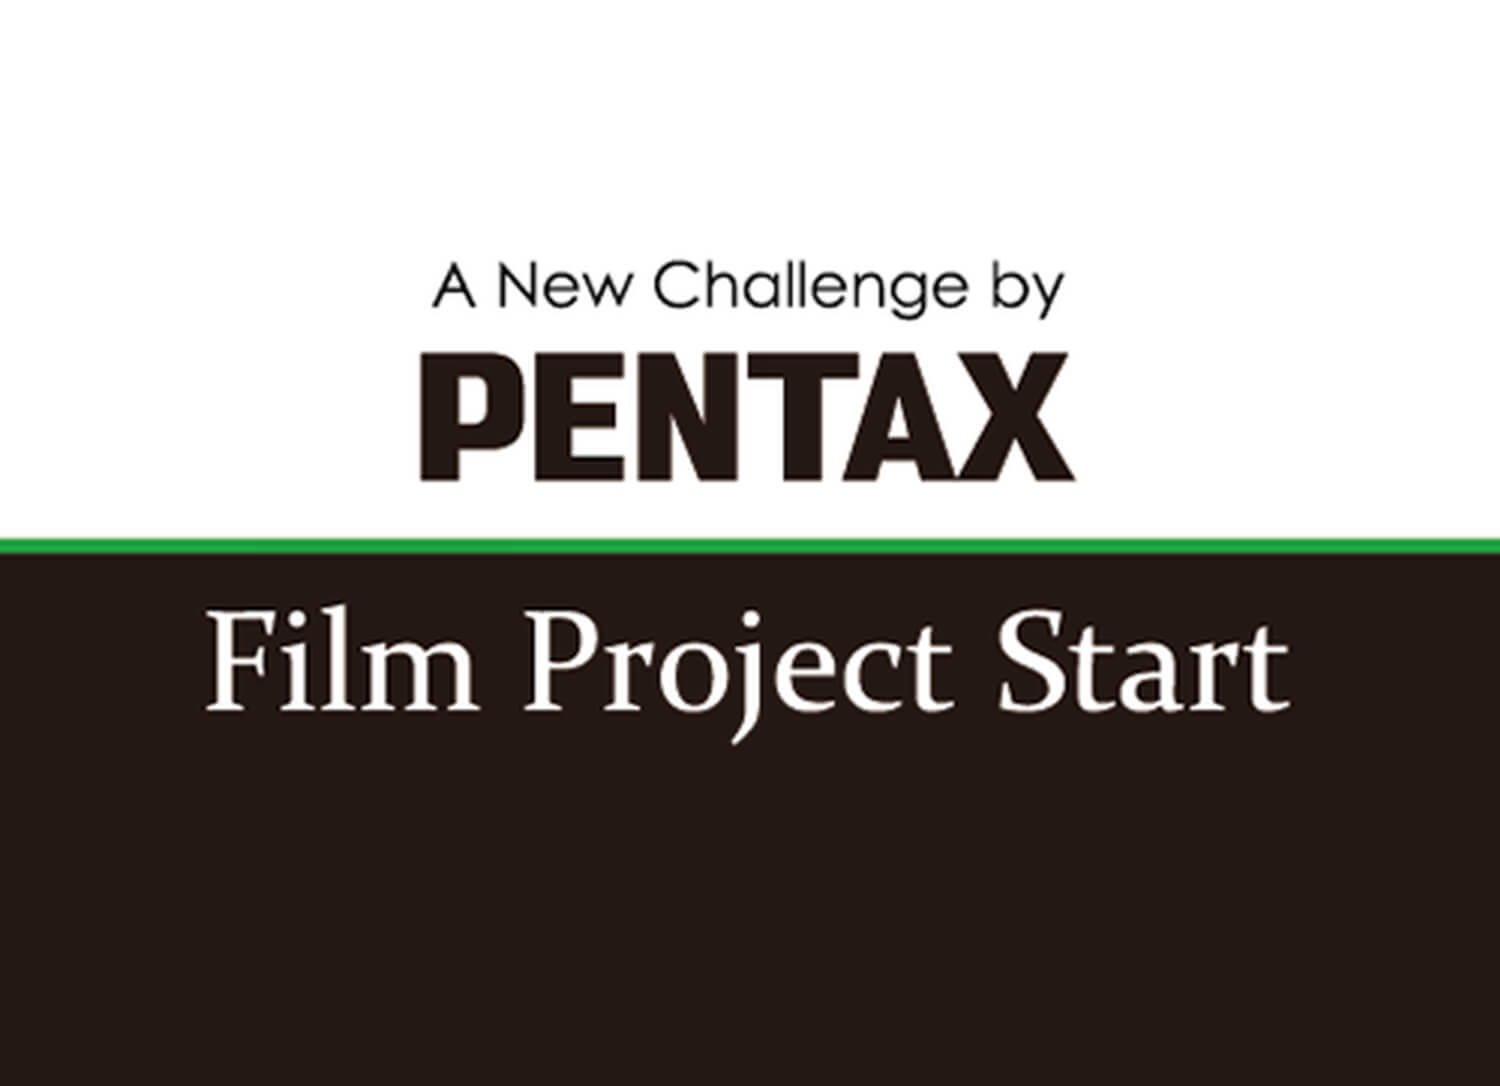 New film cameras from PENTAX / Ricoh Imaging? “Film Project Start”